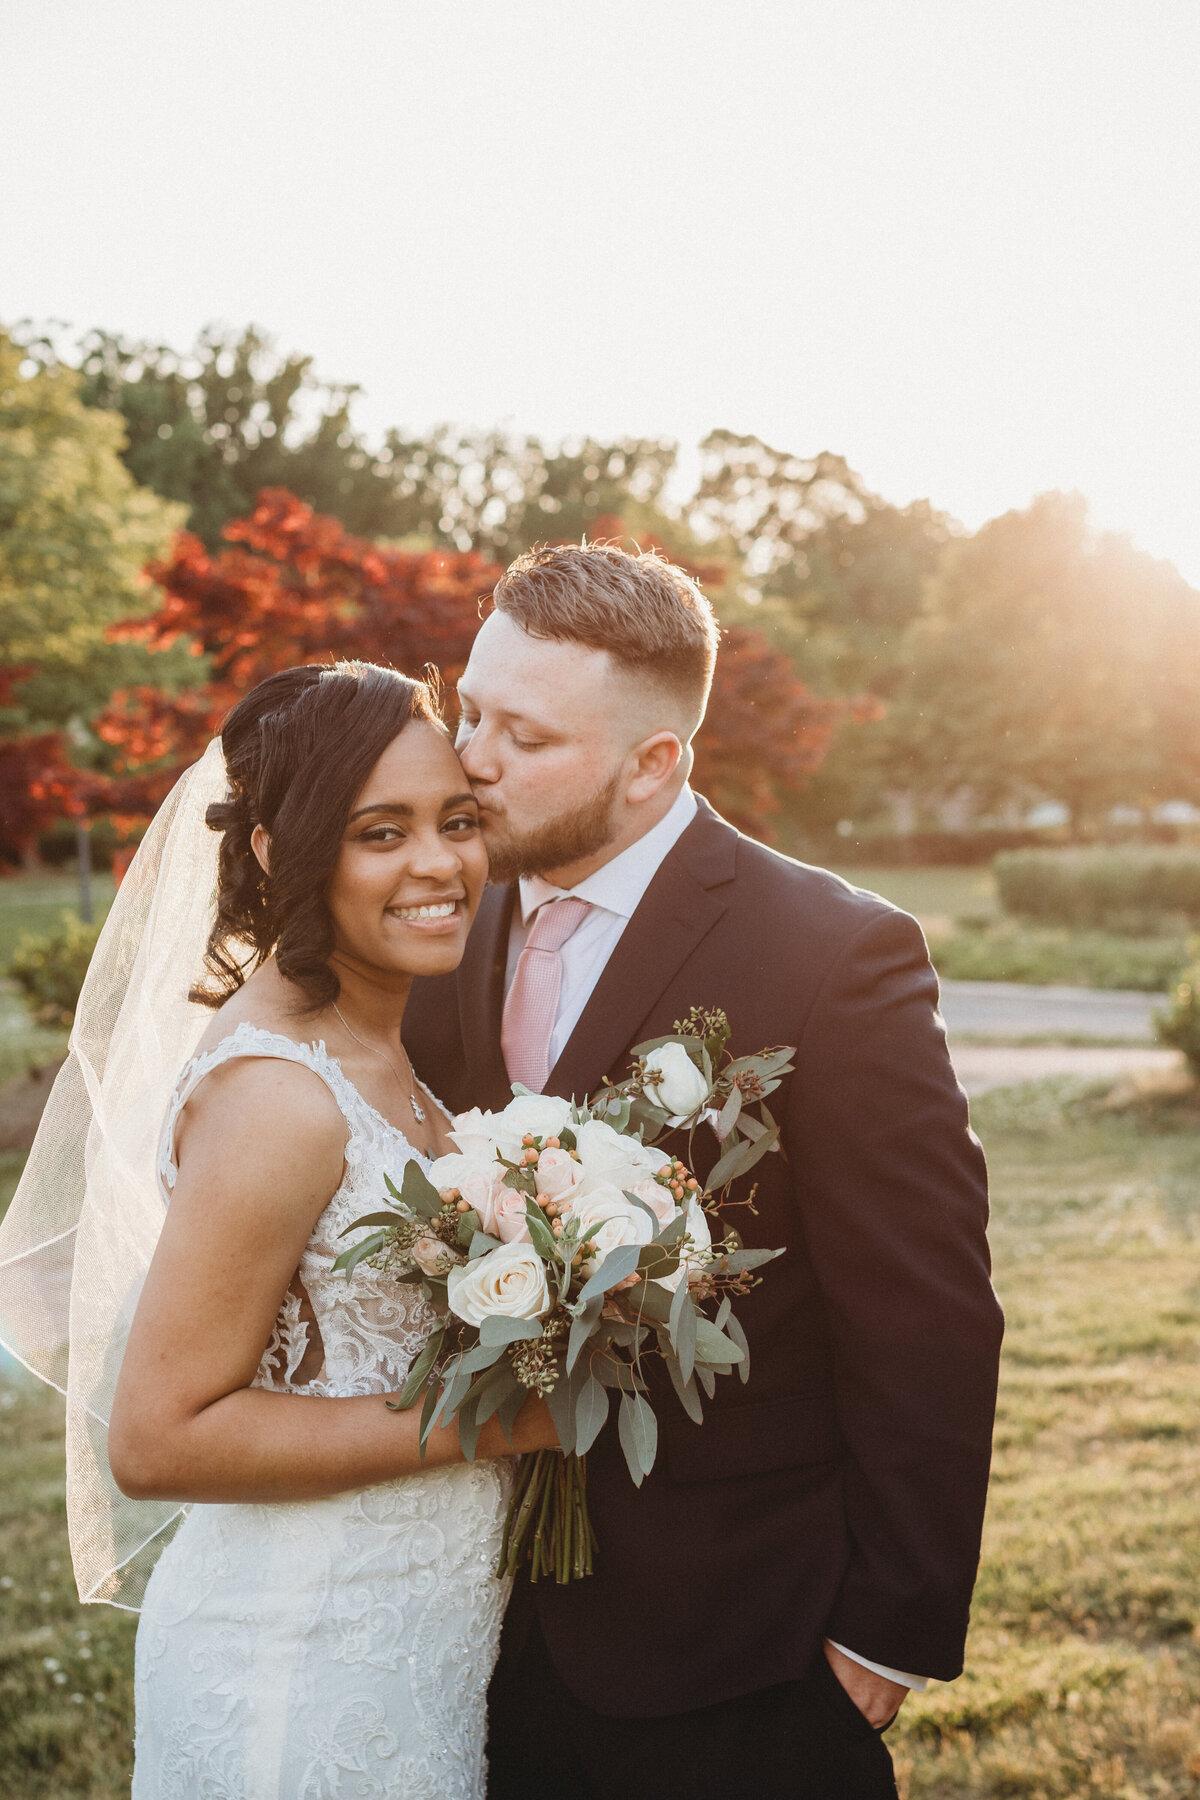 Makayla & Roberts Intimate Wedding at Quietwaters Park Annapolis Maryland (372 of 389)